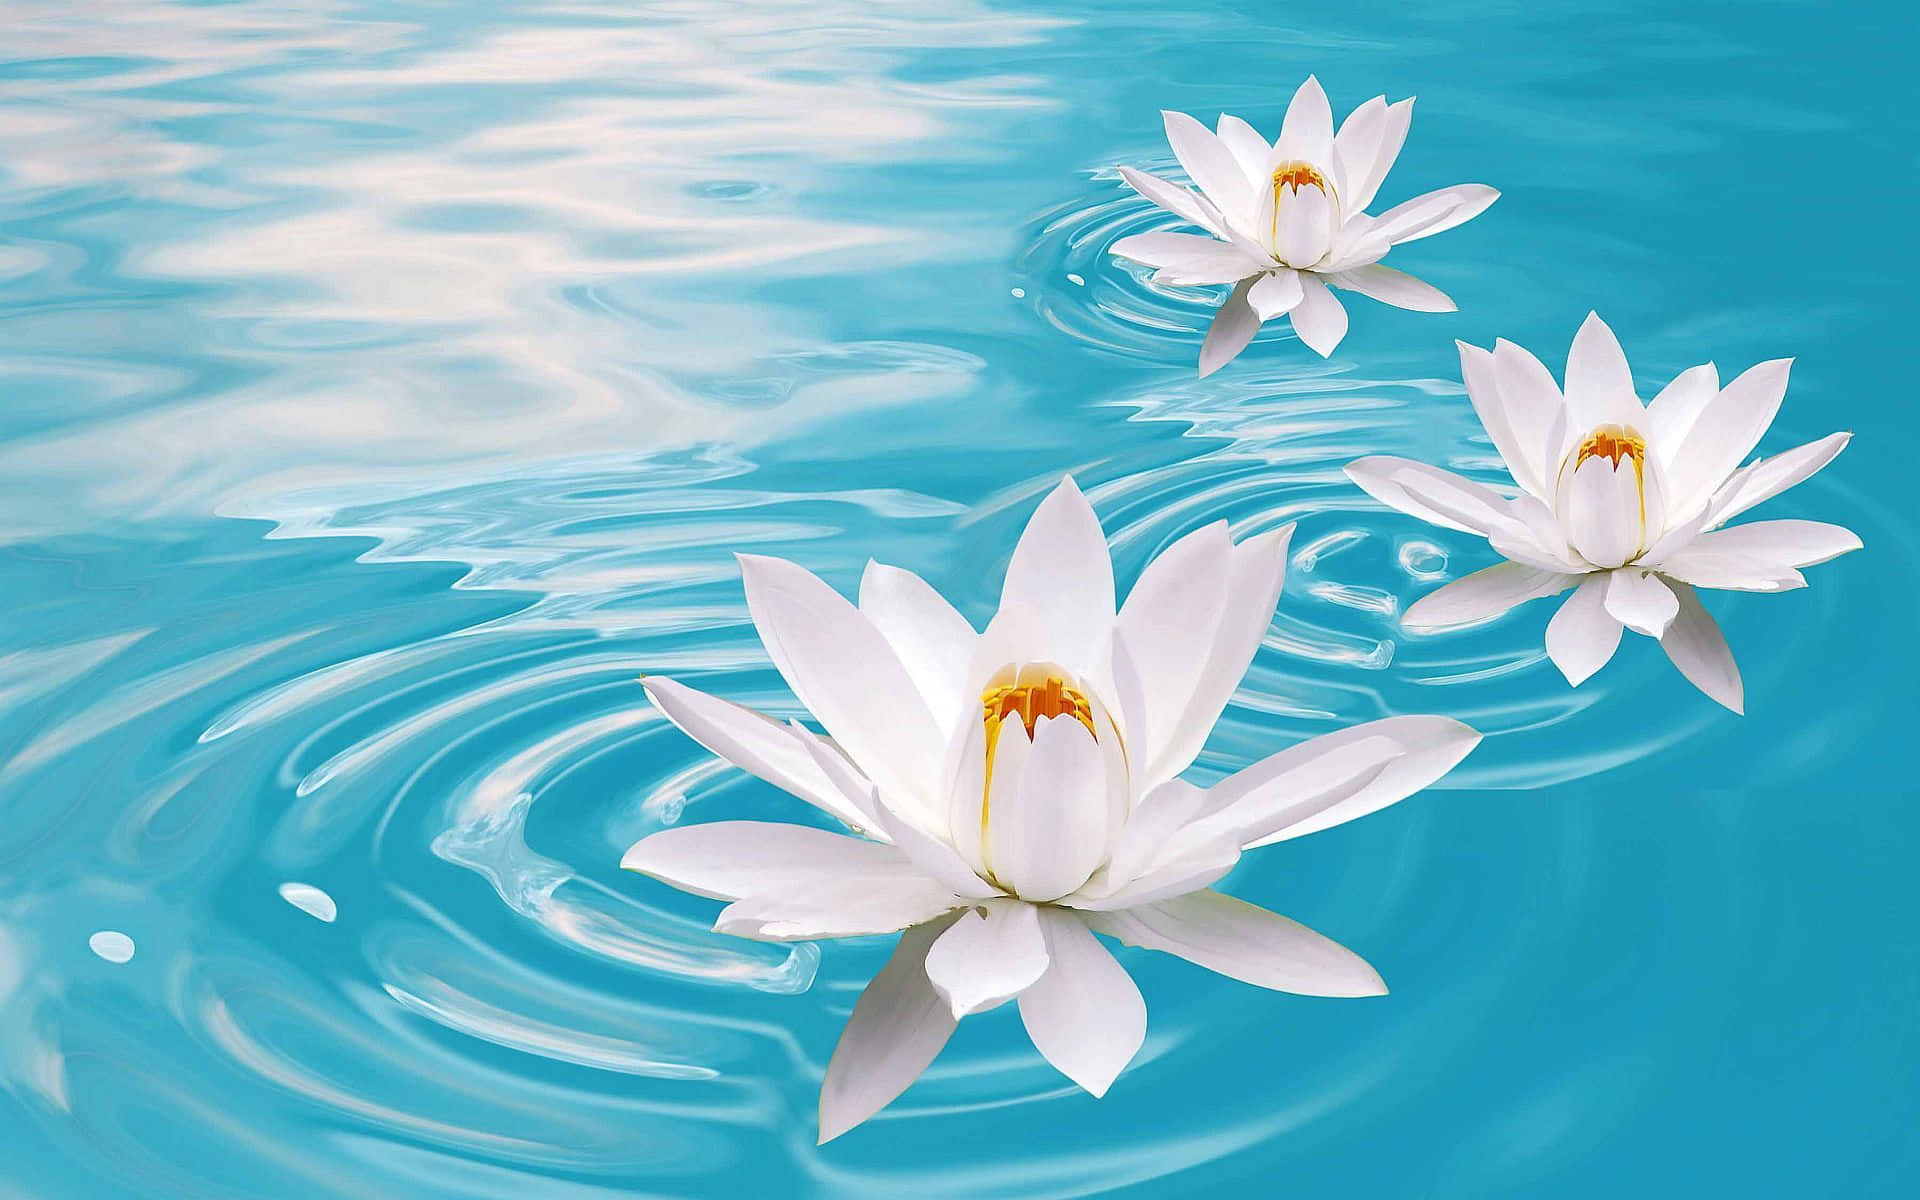 The beautiful pink lotus floating in a tranquil turquoise pond.